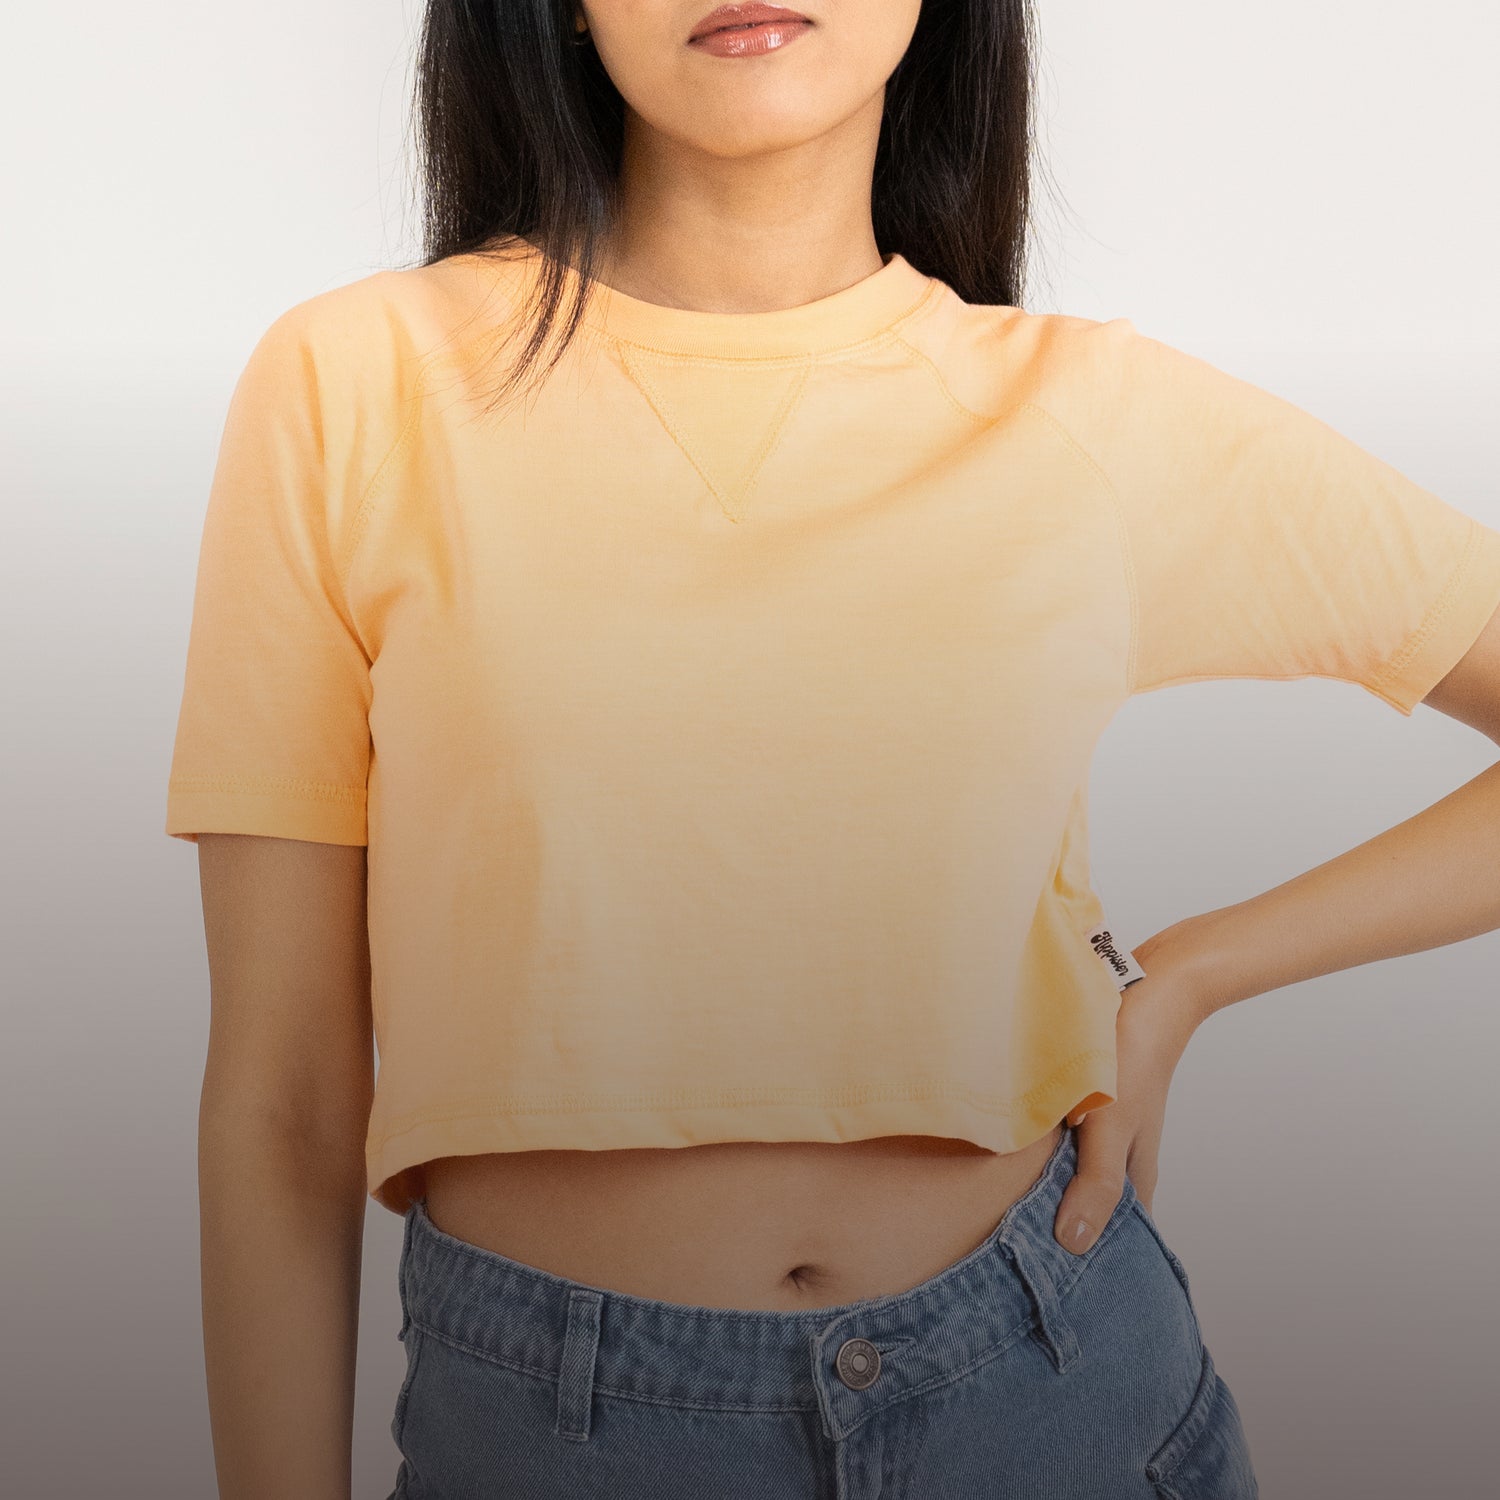 Womens-Cropped Crew Neck